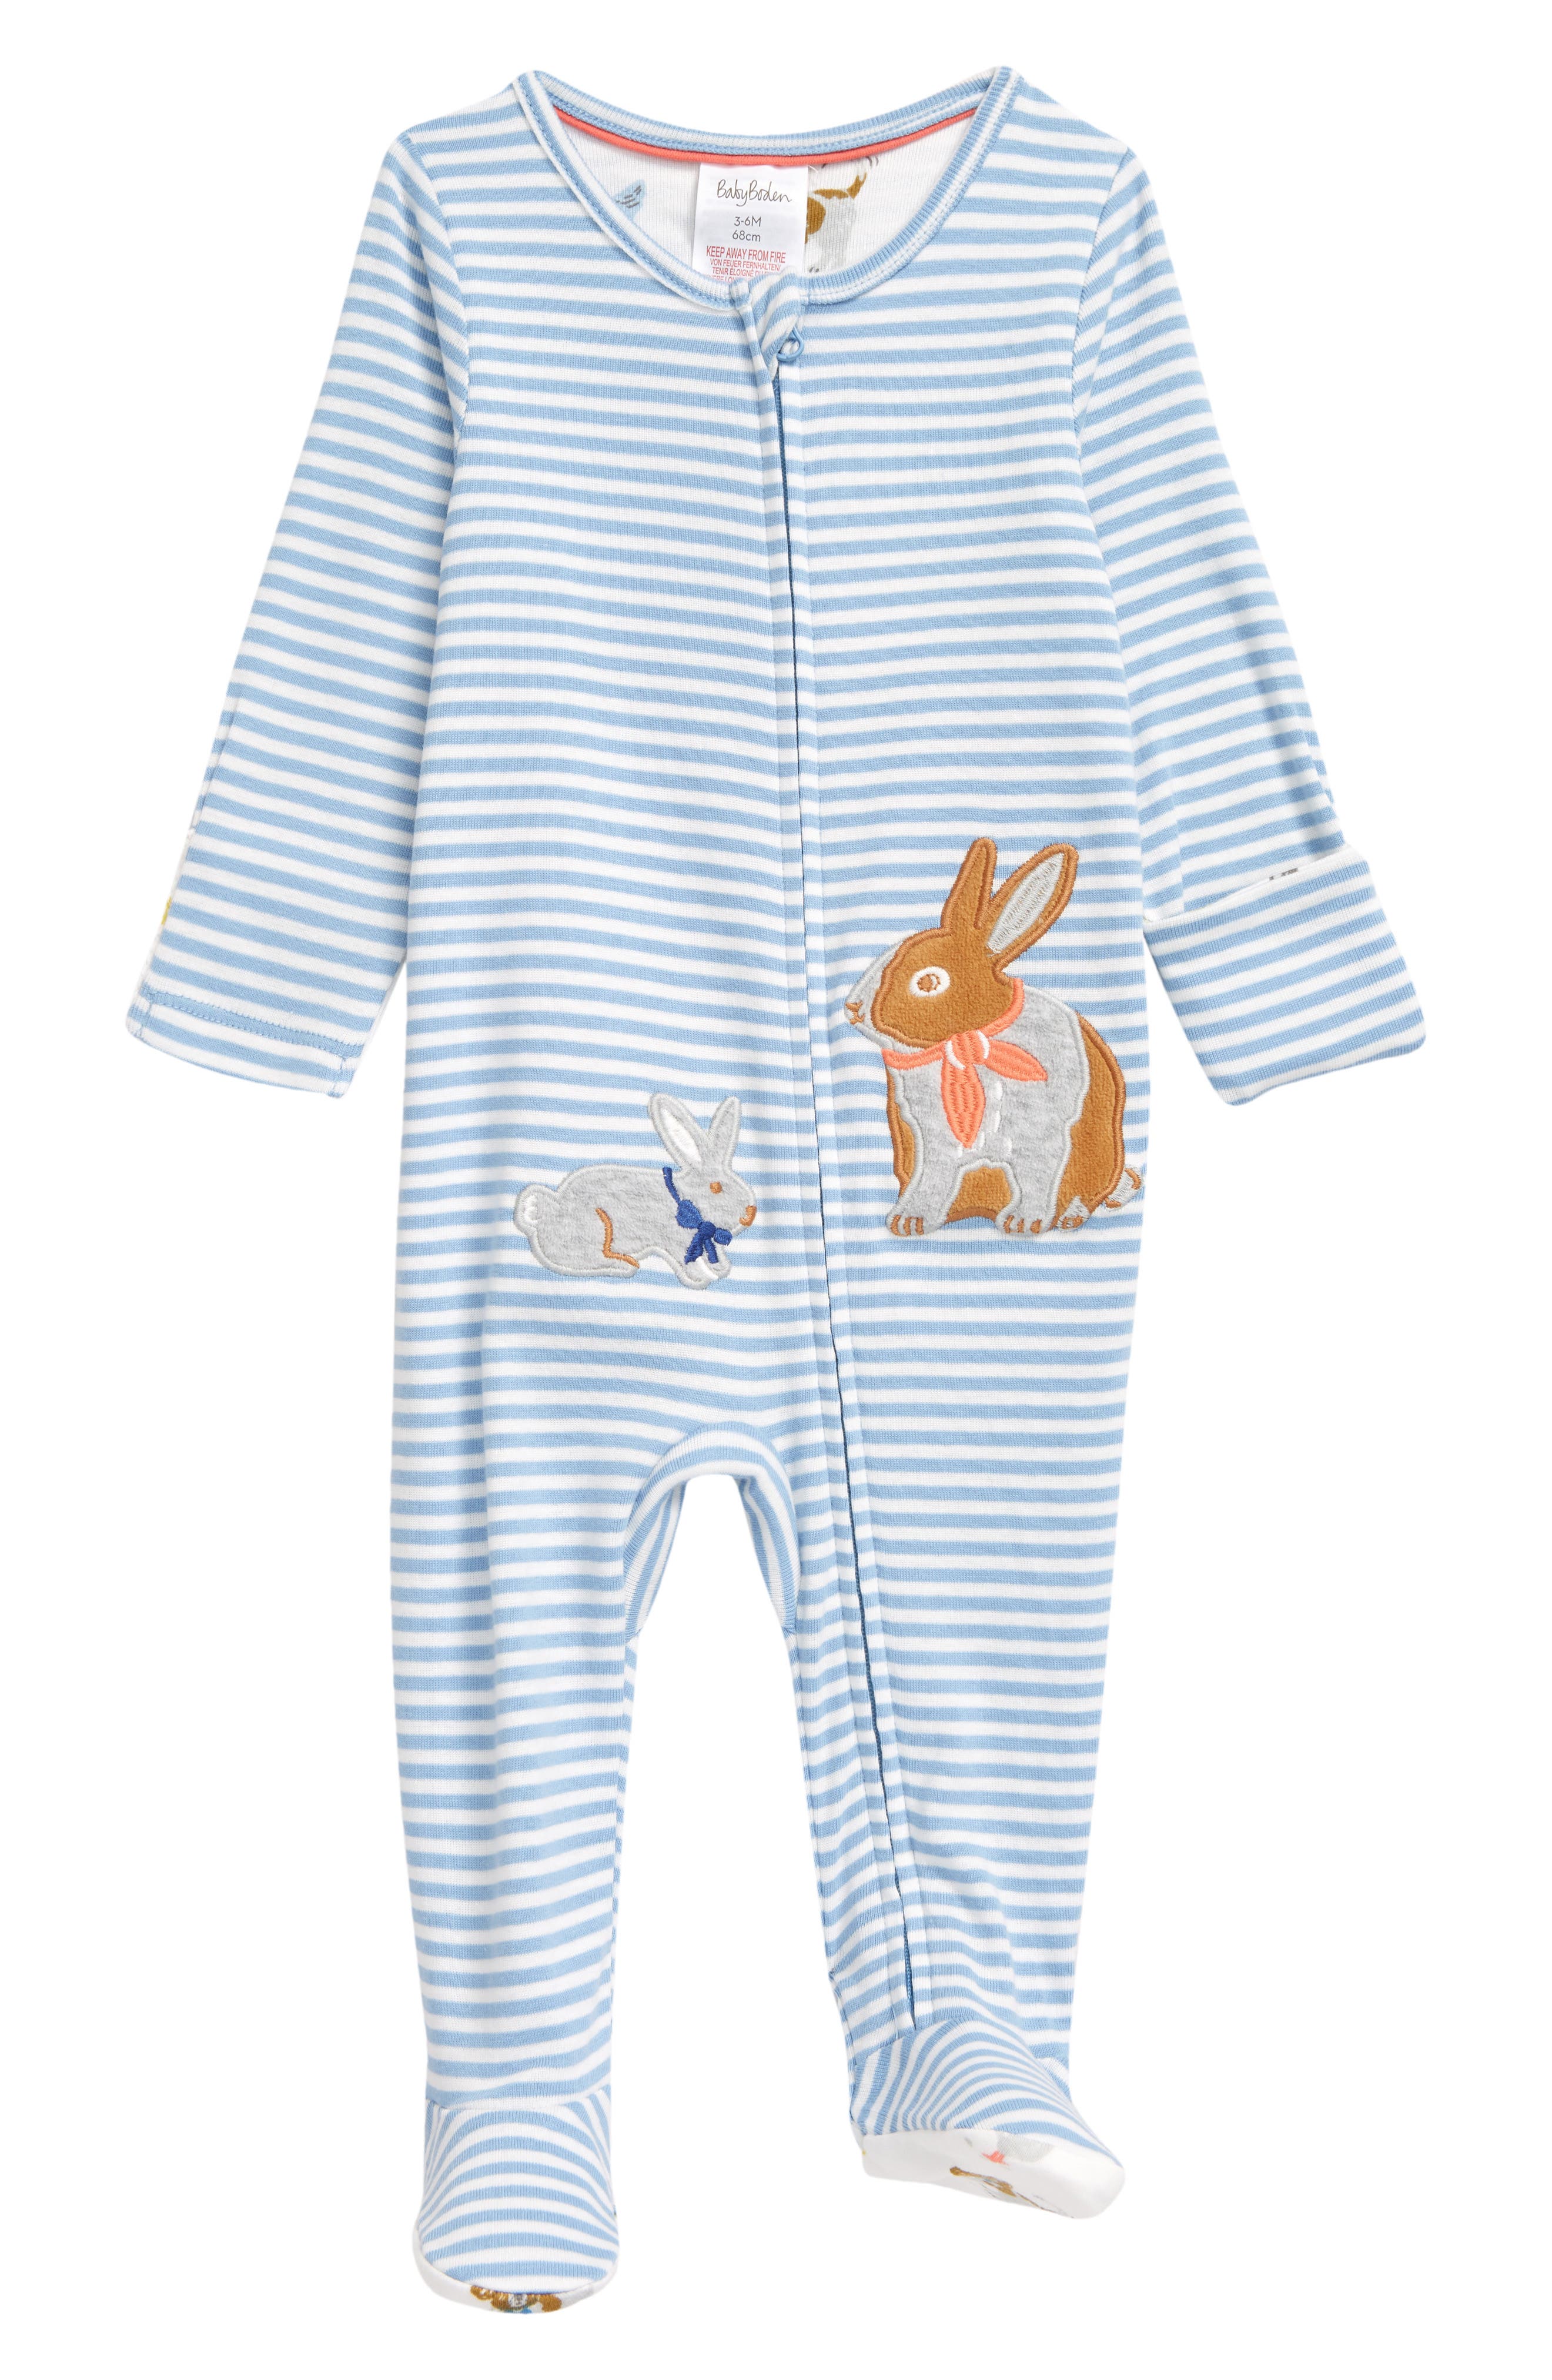 Ex Baby Boden Girls 2 Pack Pets Stripe Footless Sleepsuit Romper Age 0-24 Mths 